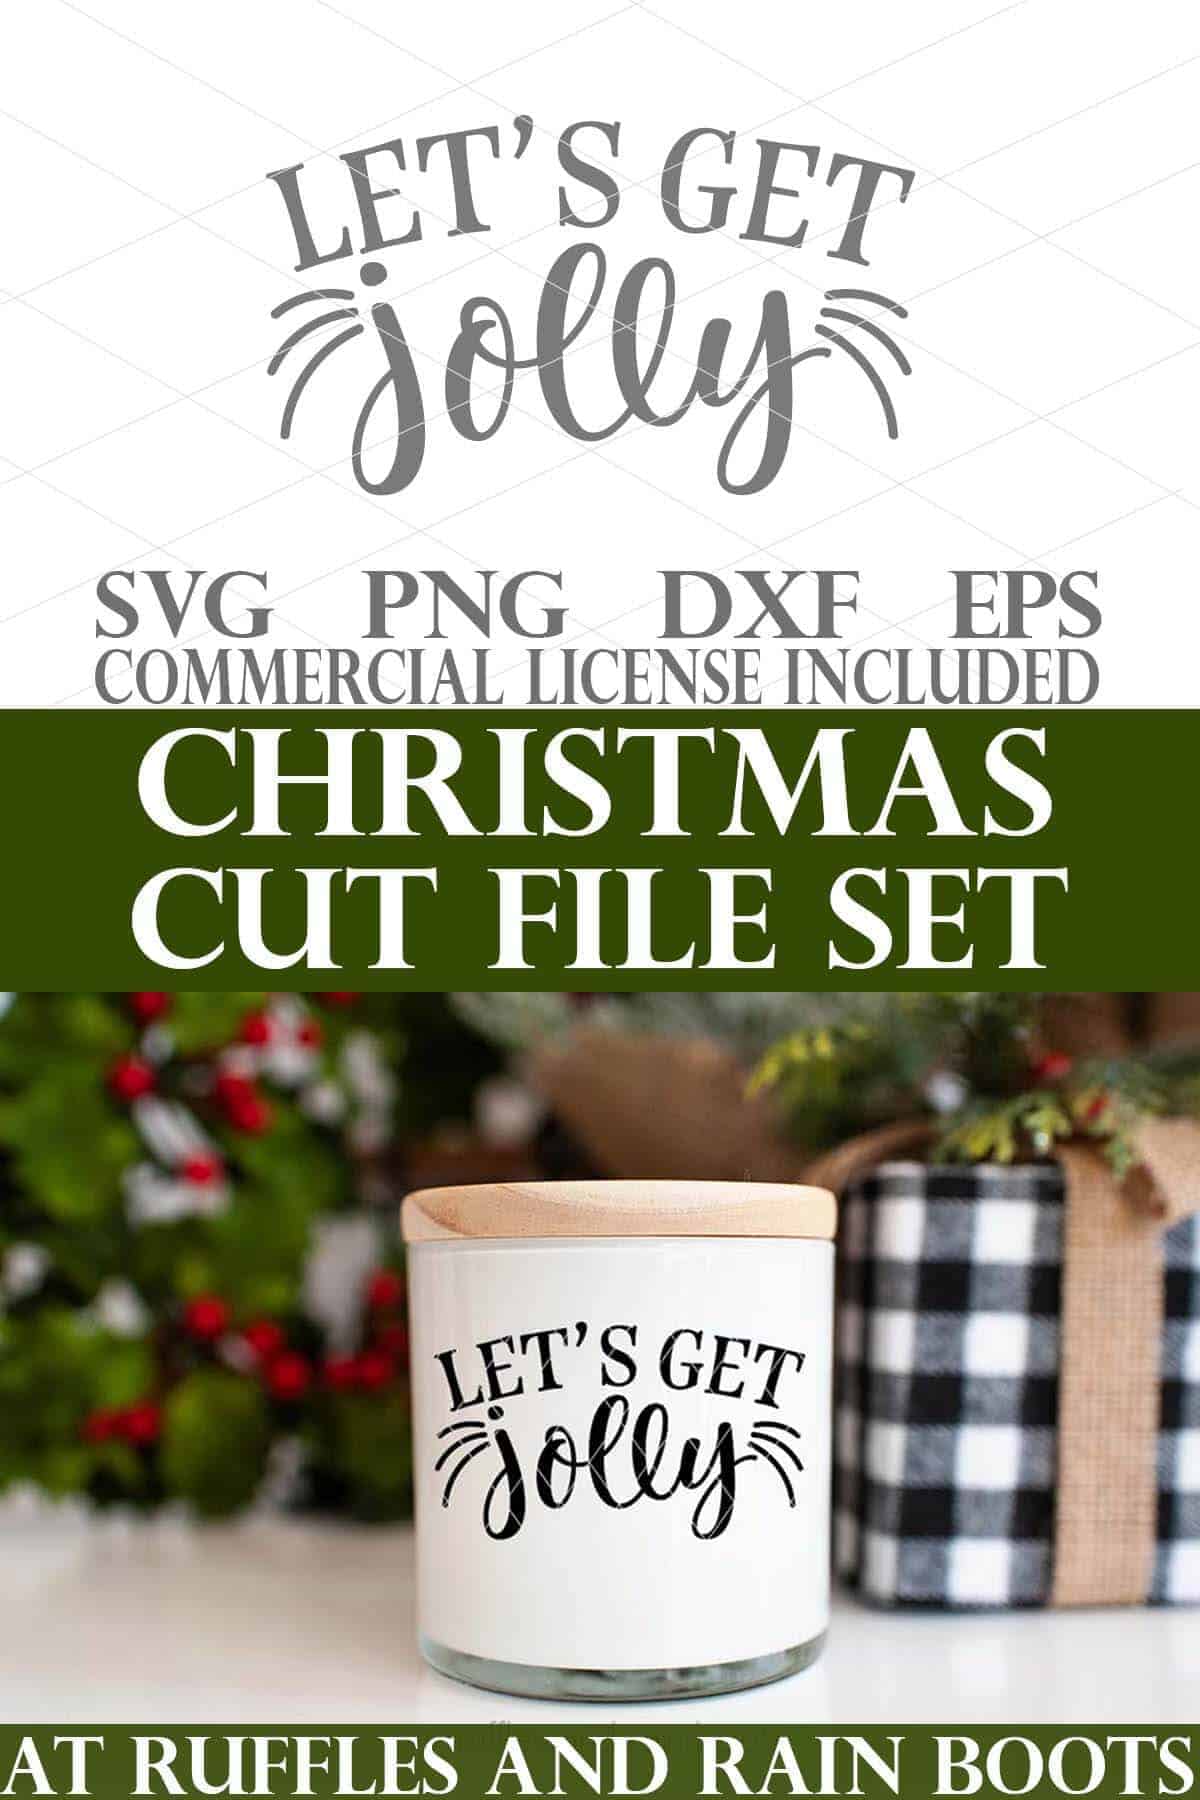 Vertical stacked image collage of let's jet jolly SVG on candle in black vinyl and text which reads Christmas cut file set.